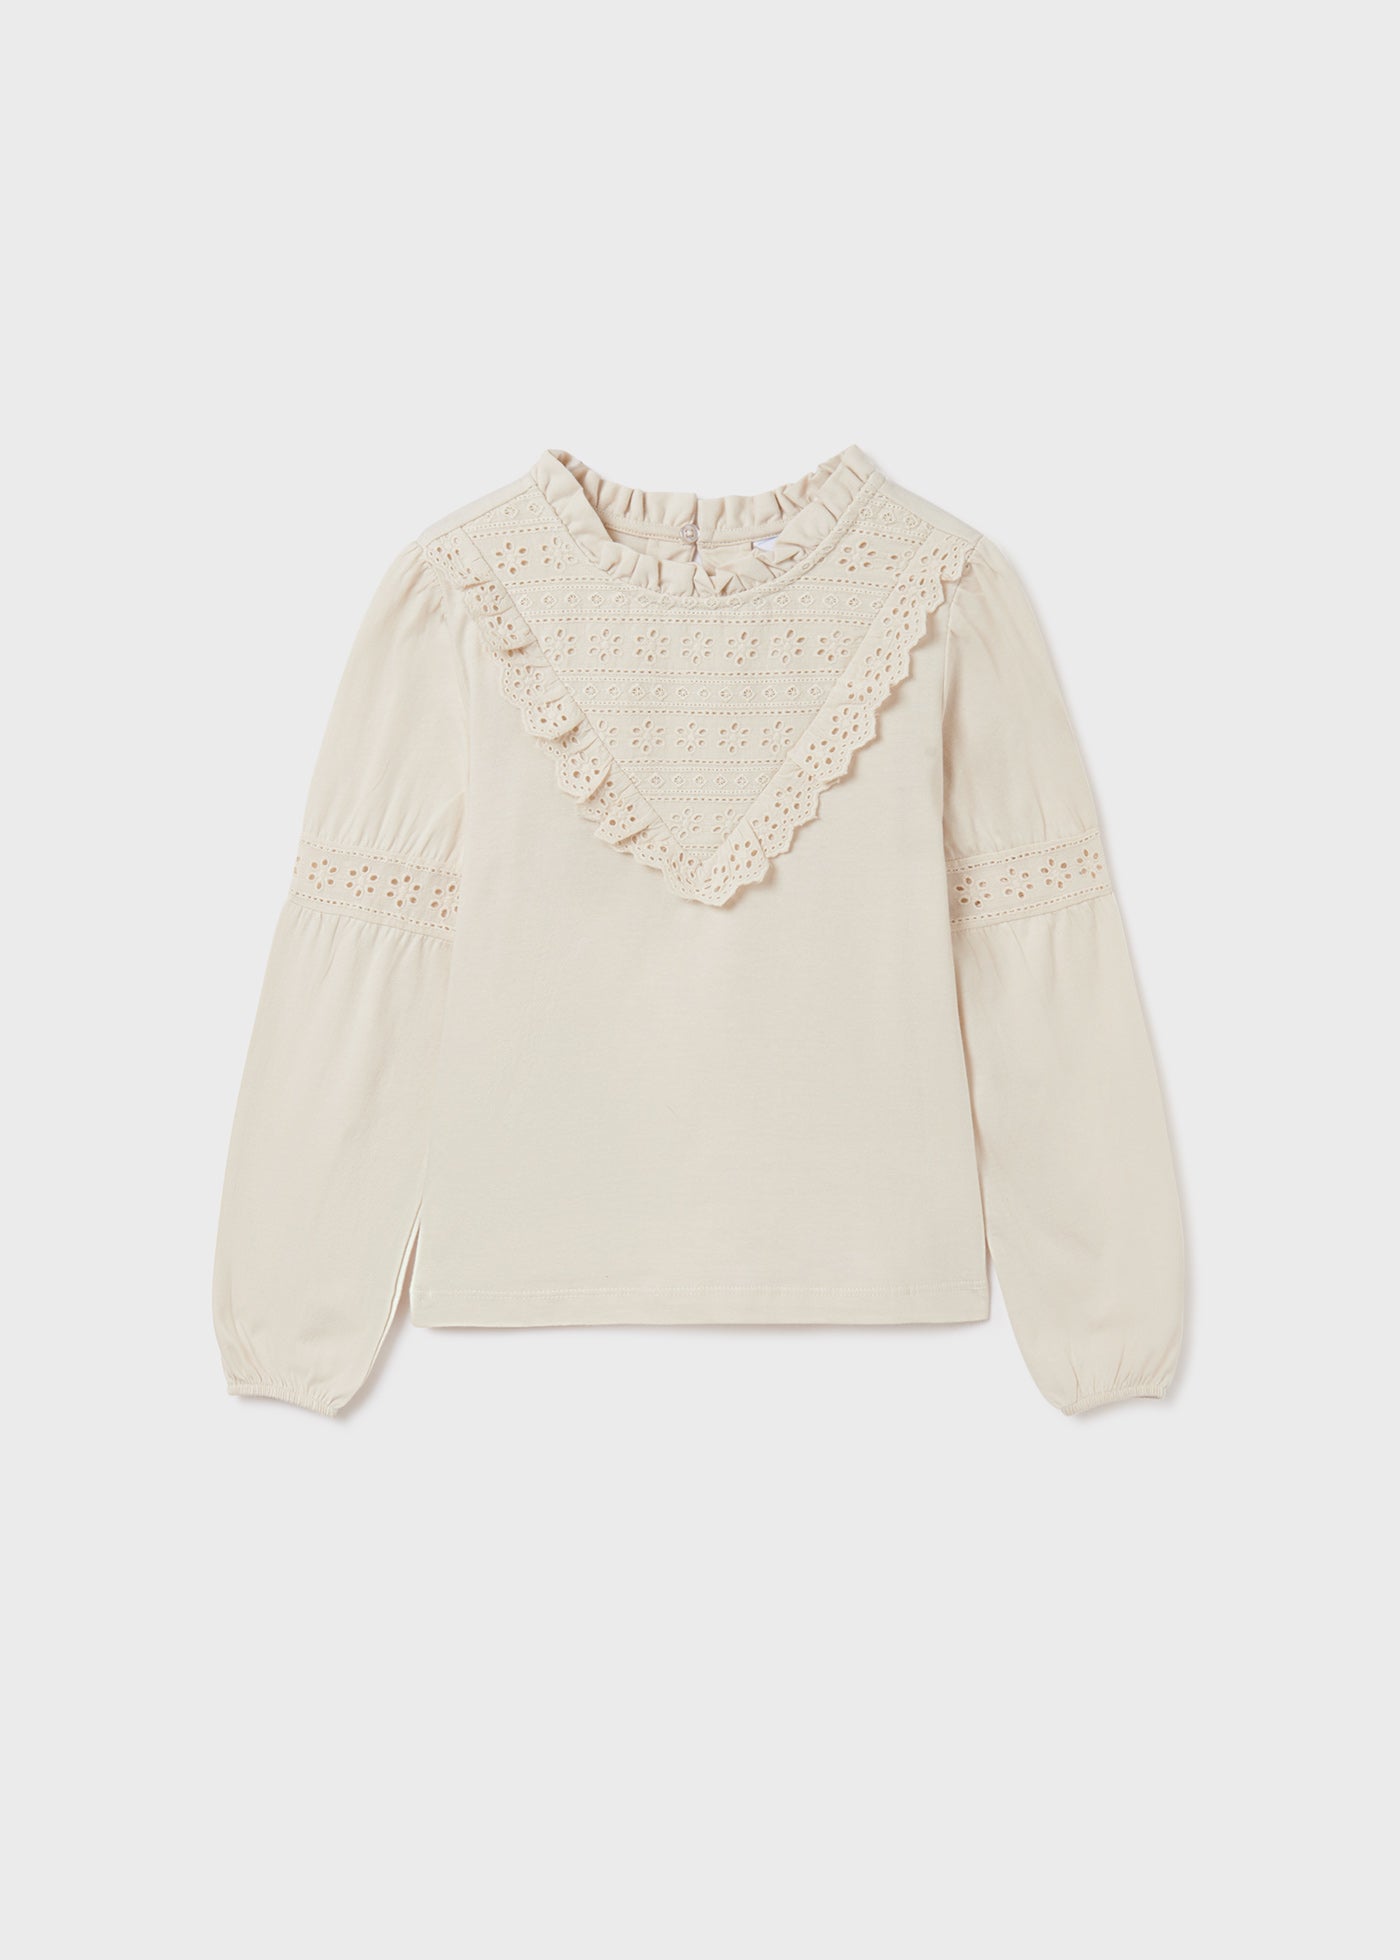 Knitted Blouse- Chickpea